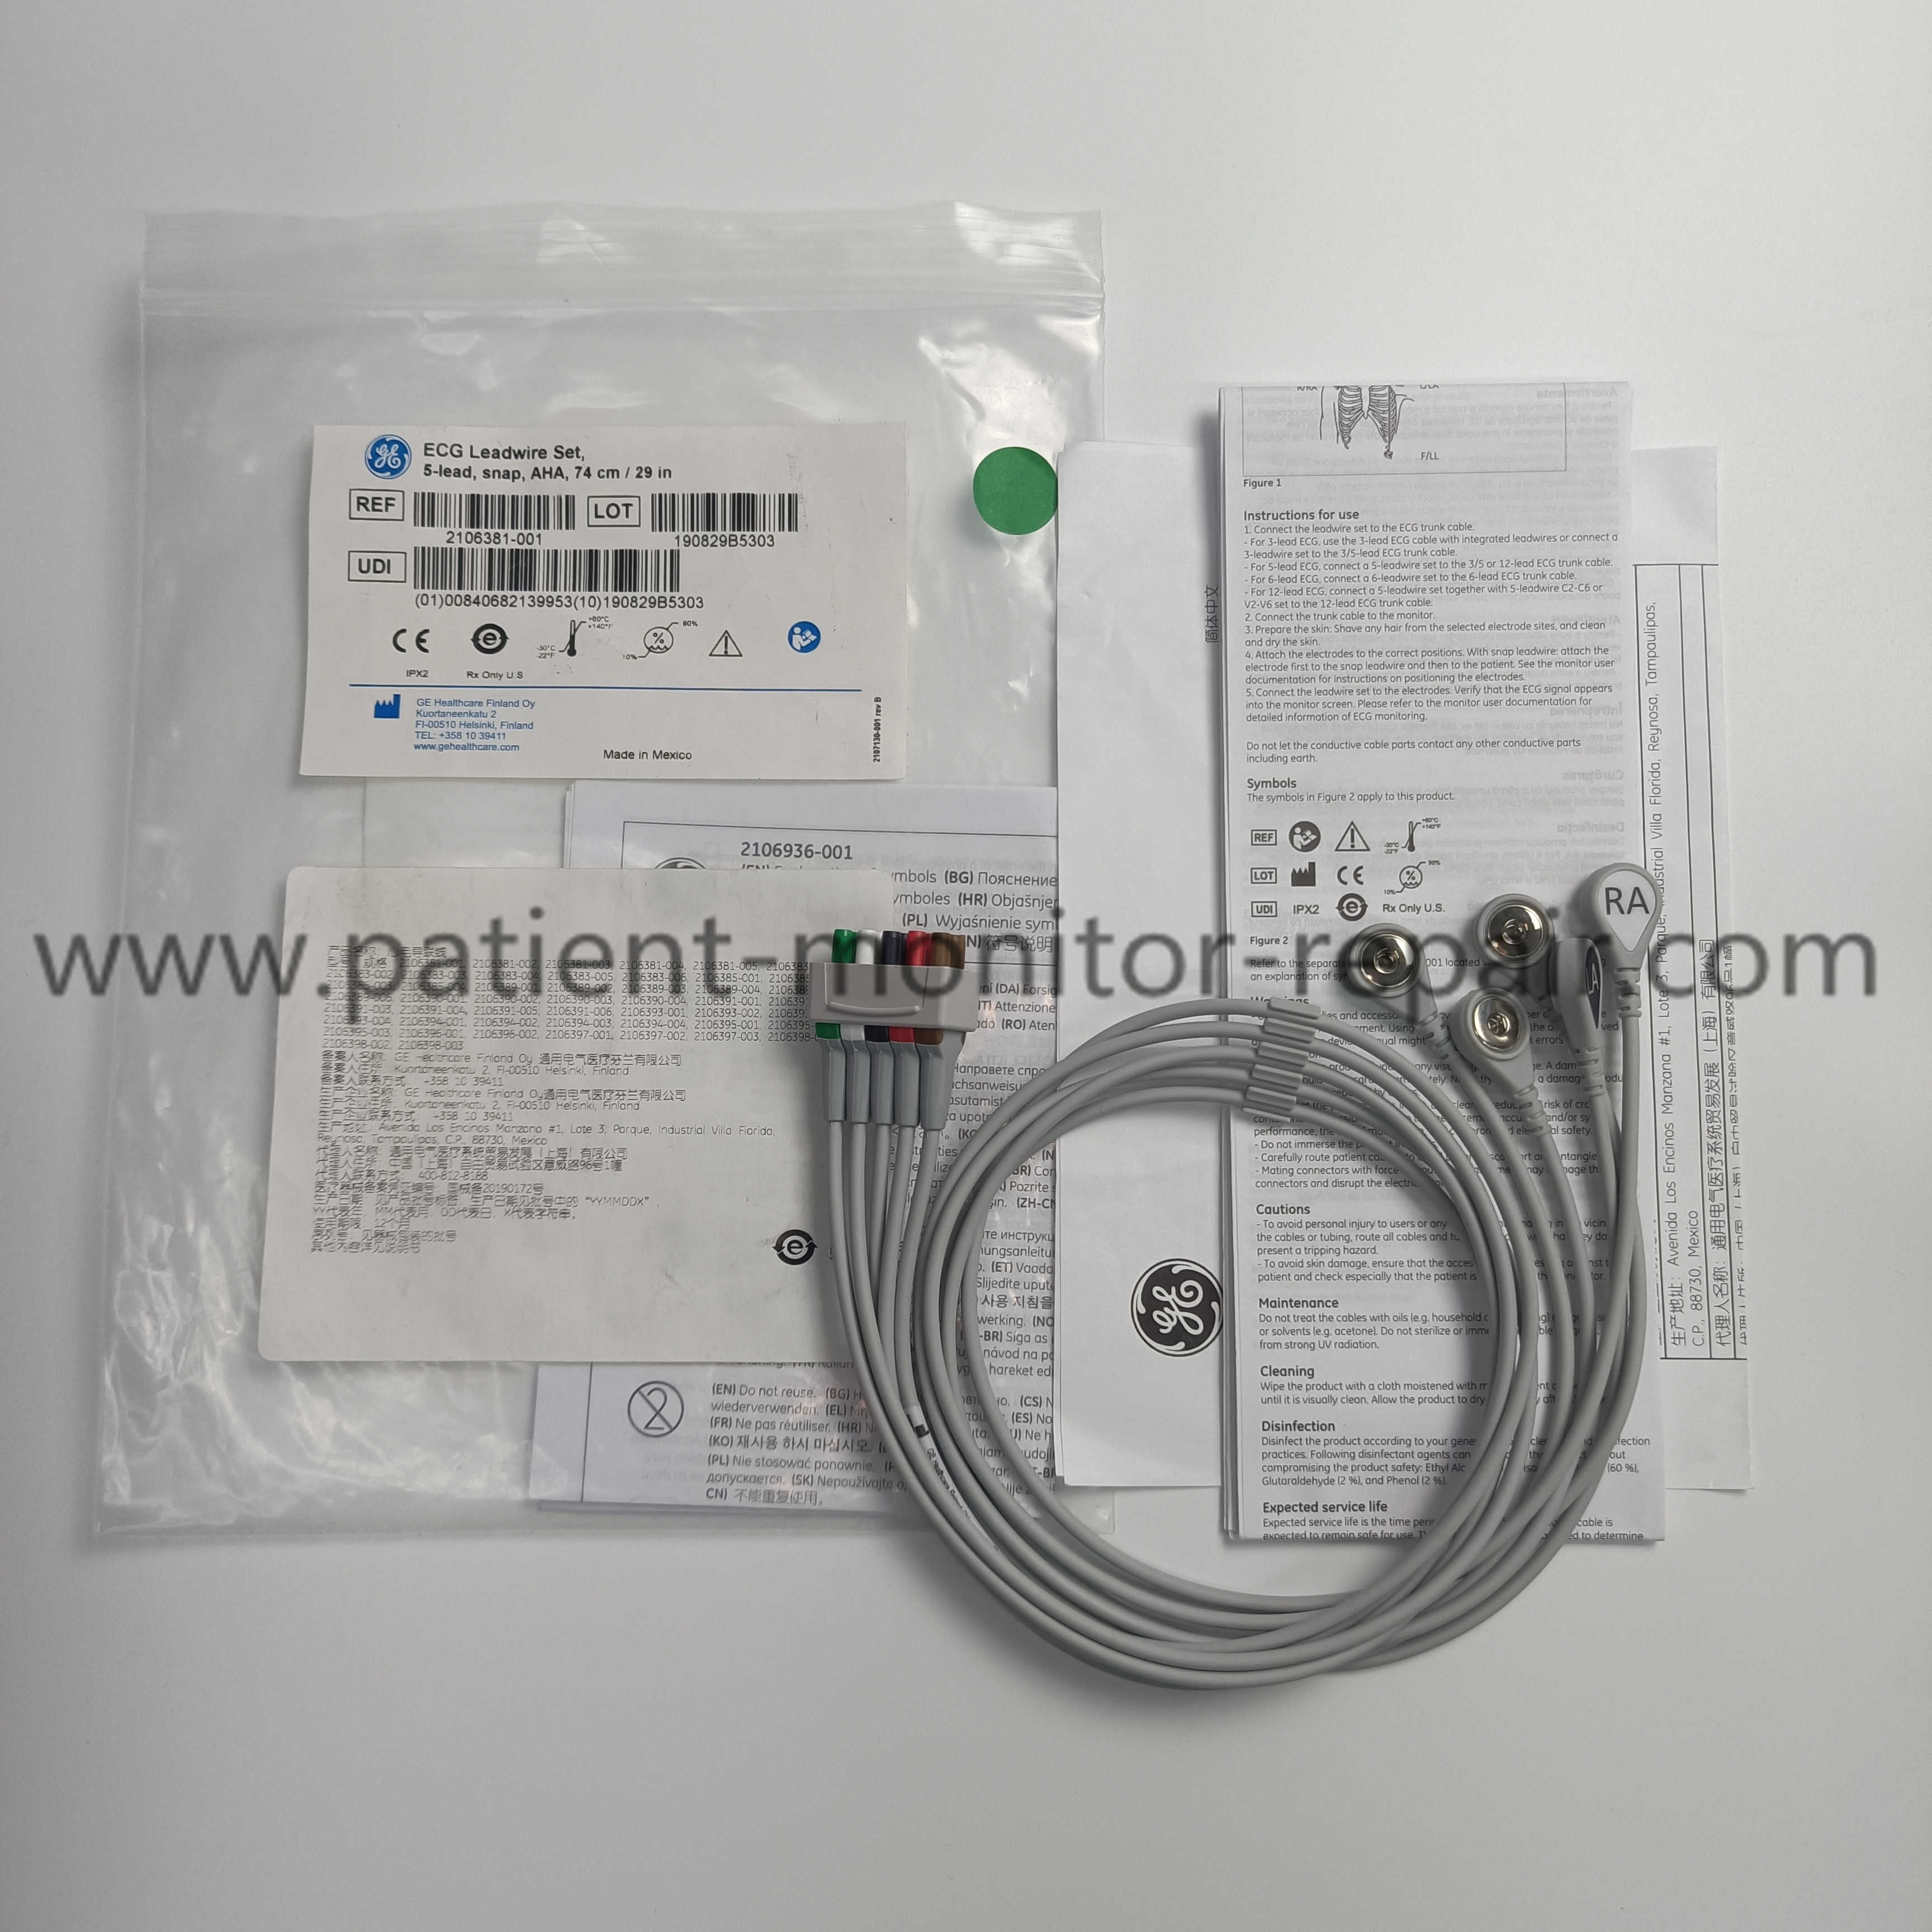 GE ECG Leadwire 5-lead set Cable, snap, AHA, 74 cm/29 in REF 2106381-001